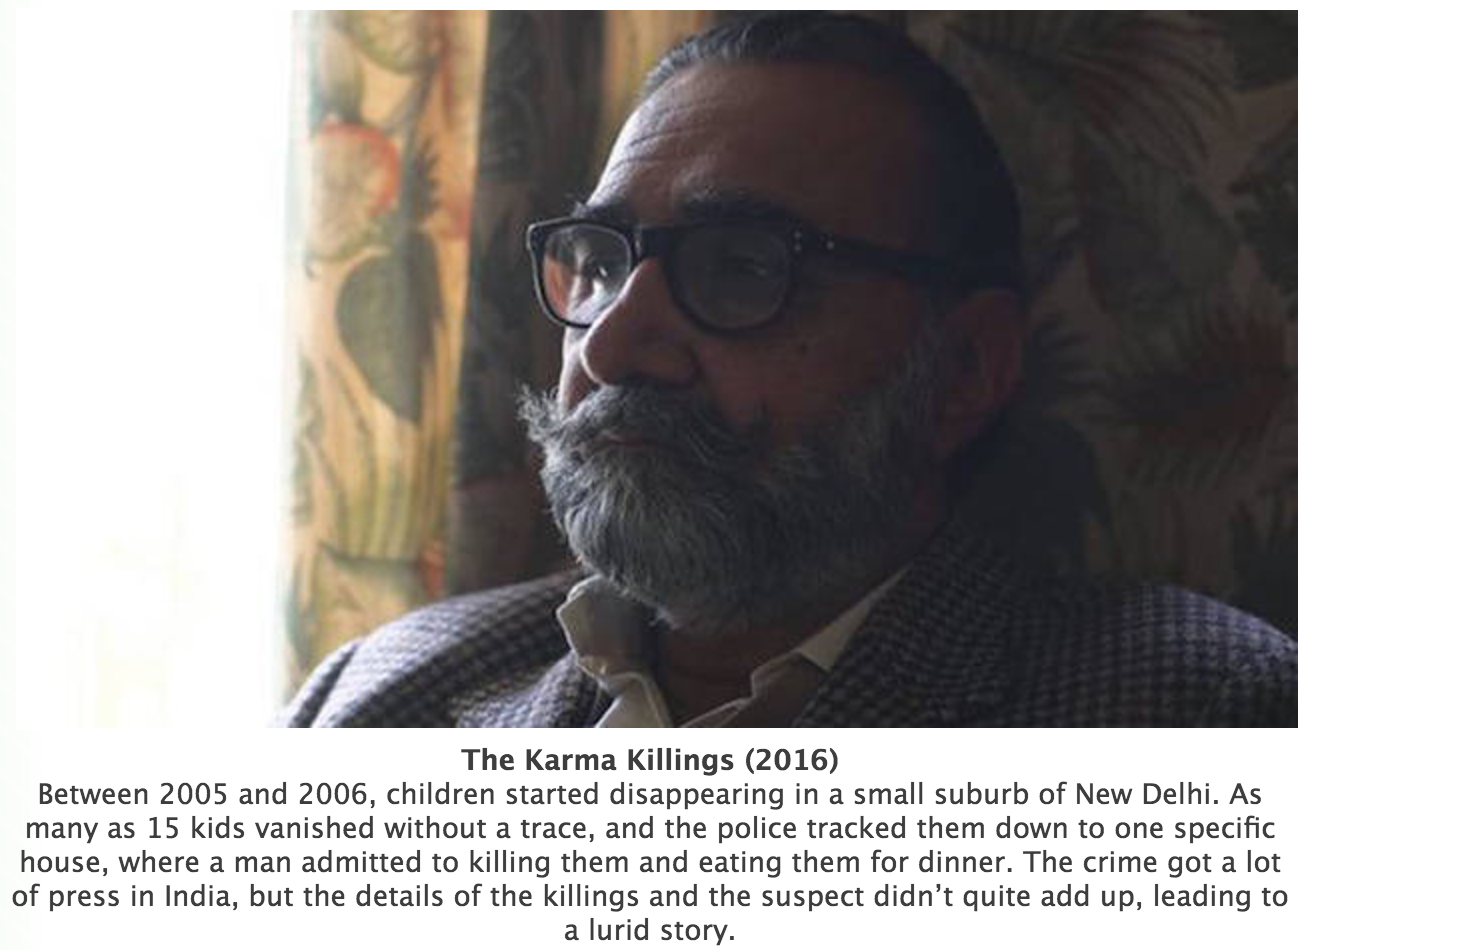 beard - The Karma Killings 2016 Between 2005 and 2006, children started disappearing in a small suburb of New Delhi. As many as 15 kids vanished without a trace, and the police tracked them down to one specific house, where a man admitted to killing them 